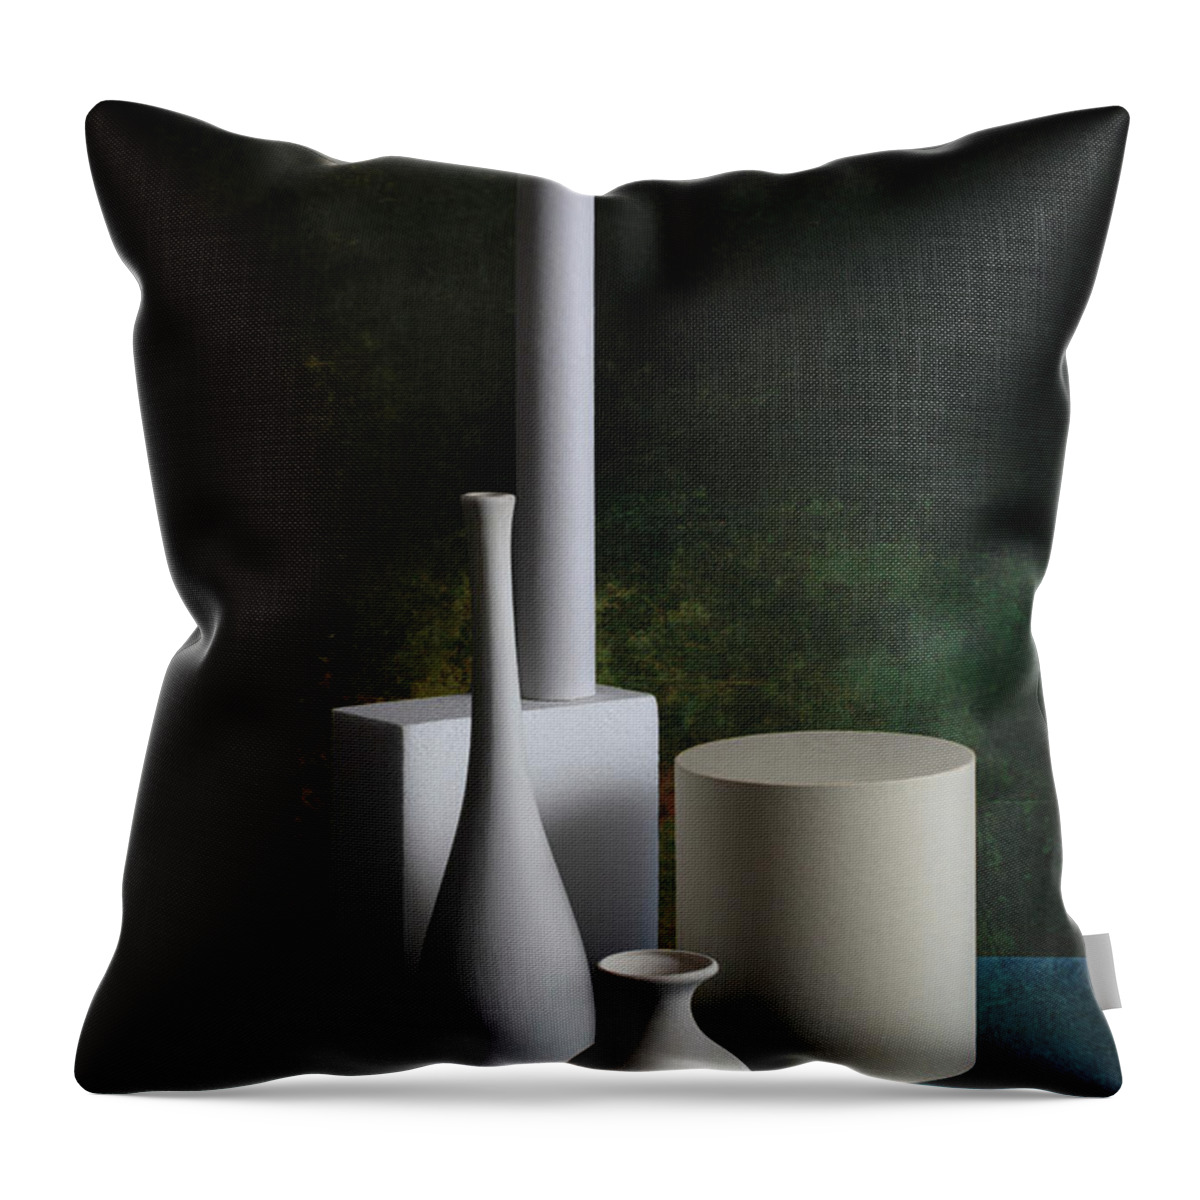 Still Life Throw Pillow featuring the photograph Still life with white vases and white figures by Valentin Ivantsov